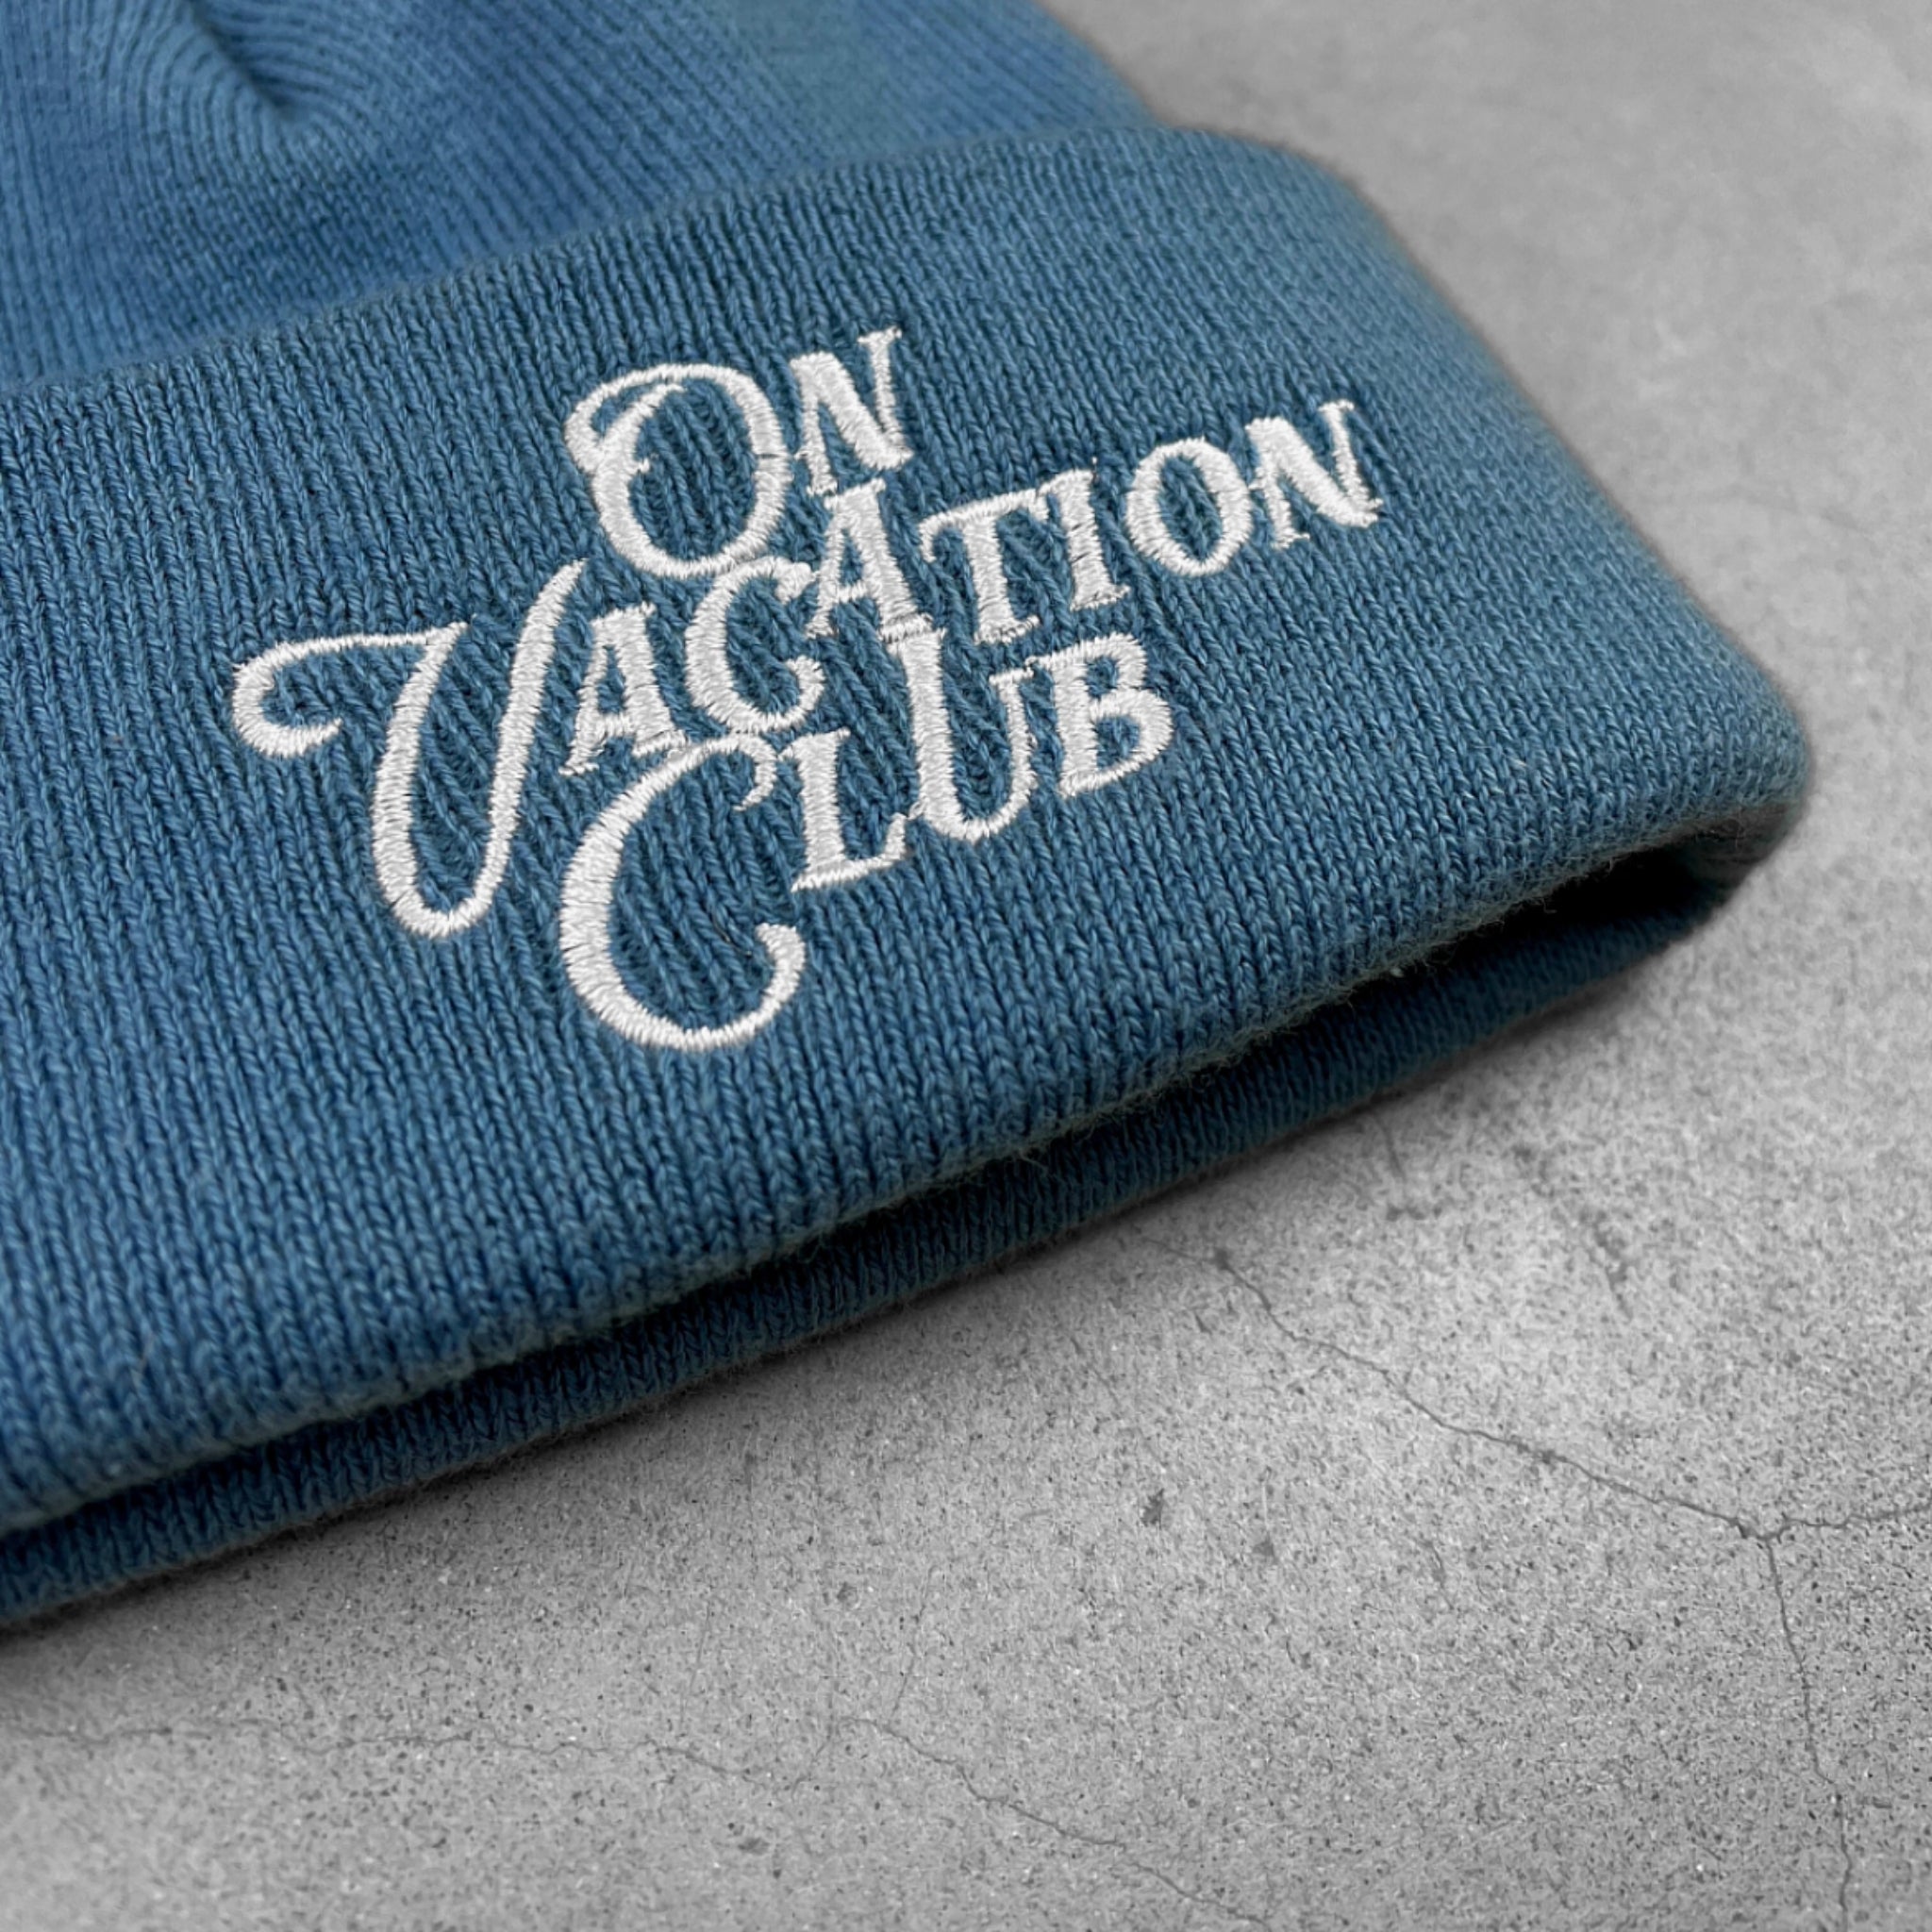 On Vacation Beanie "Calligraphy"